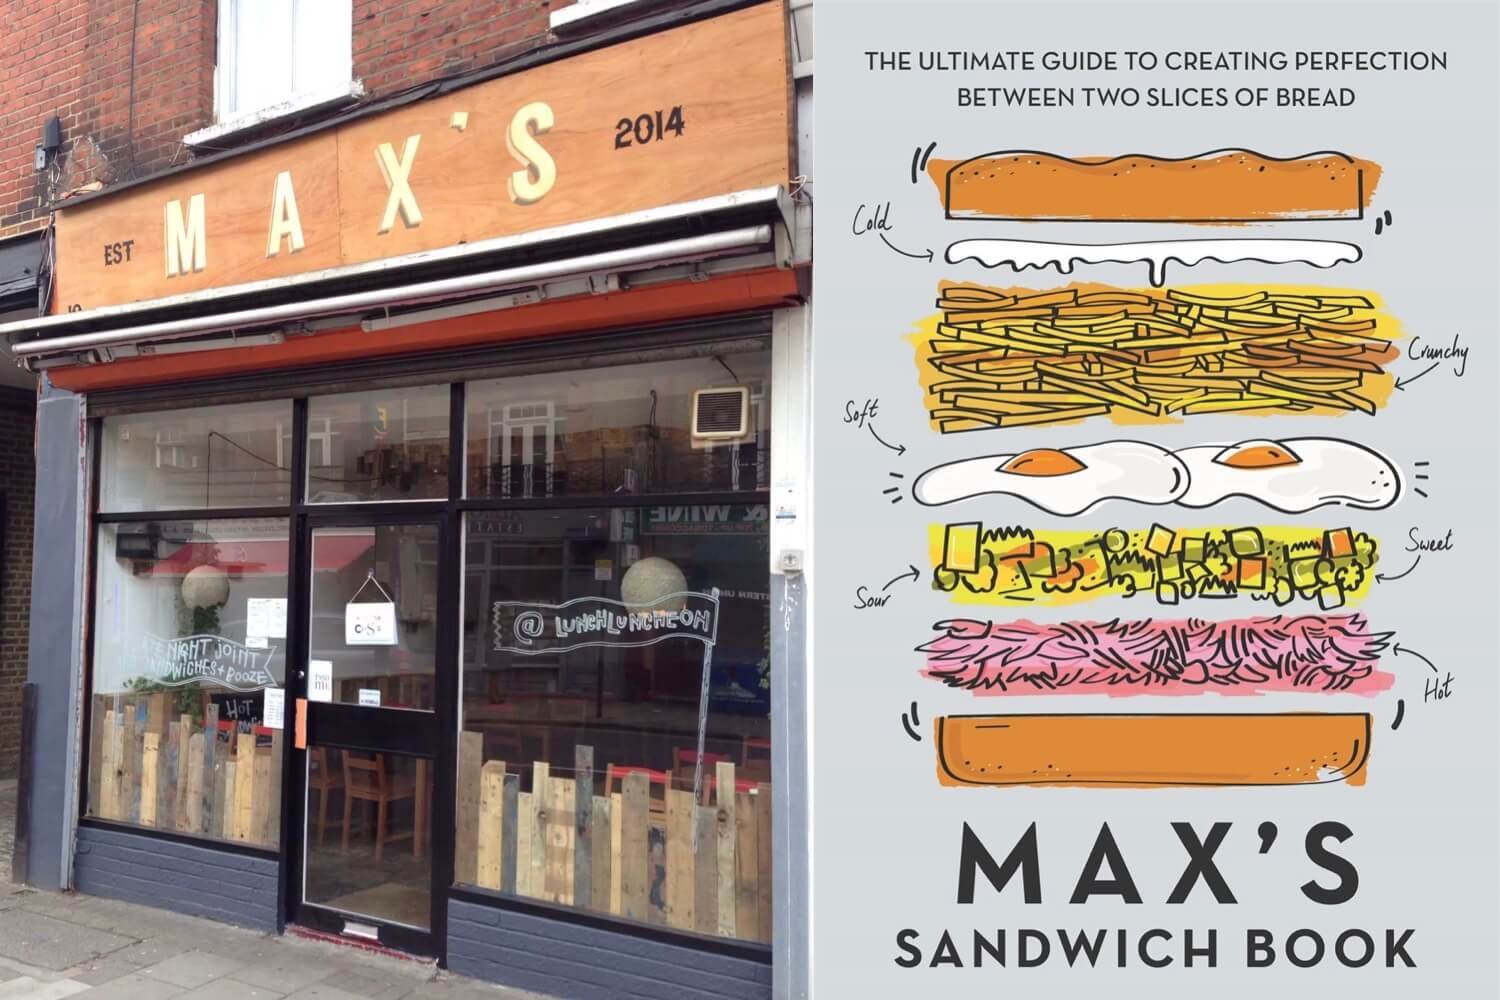 Author profile: Max Halley, author of Max's Sandwich Book